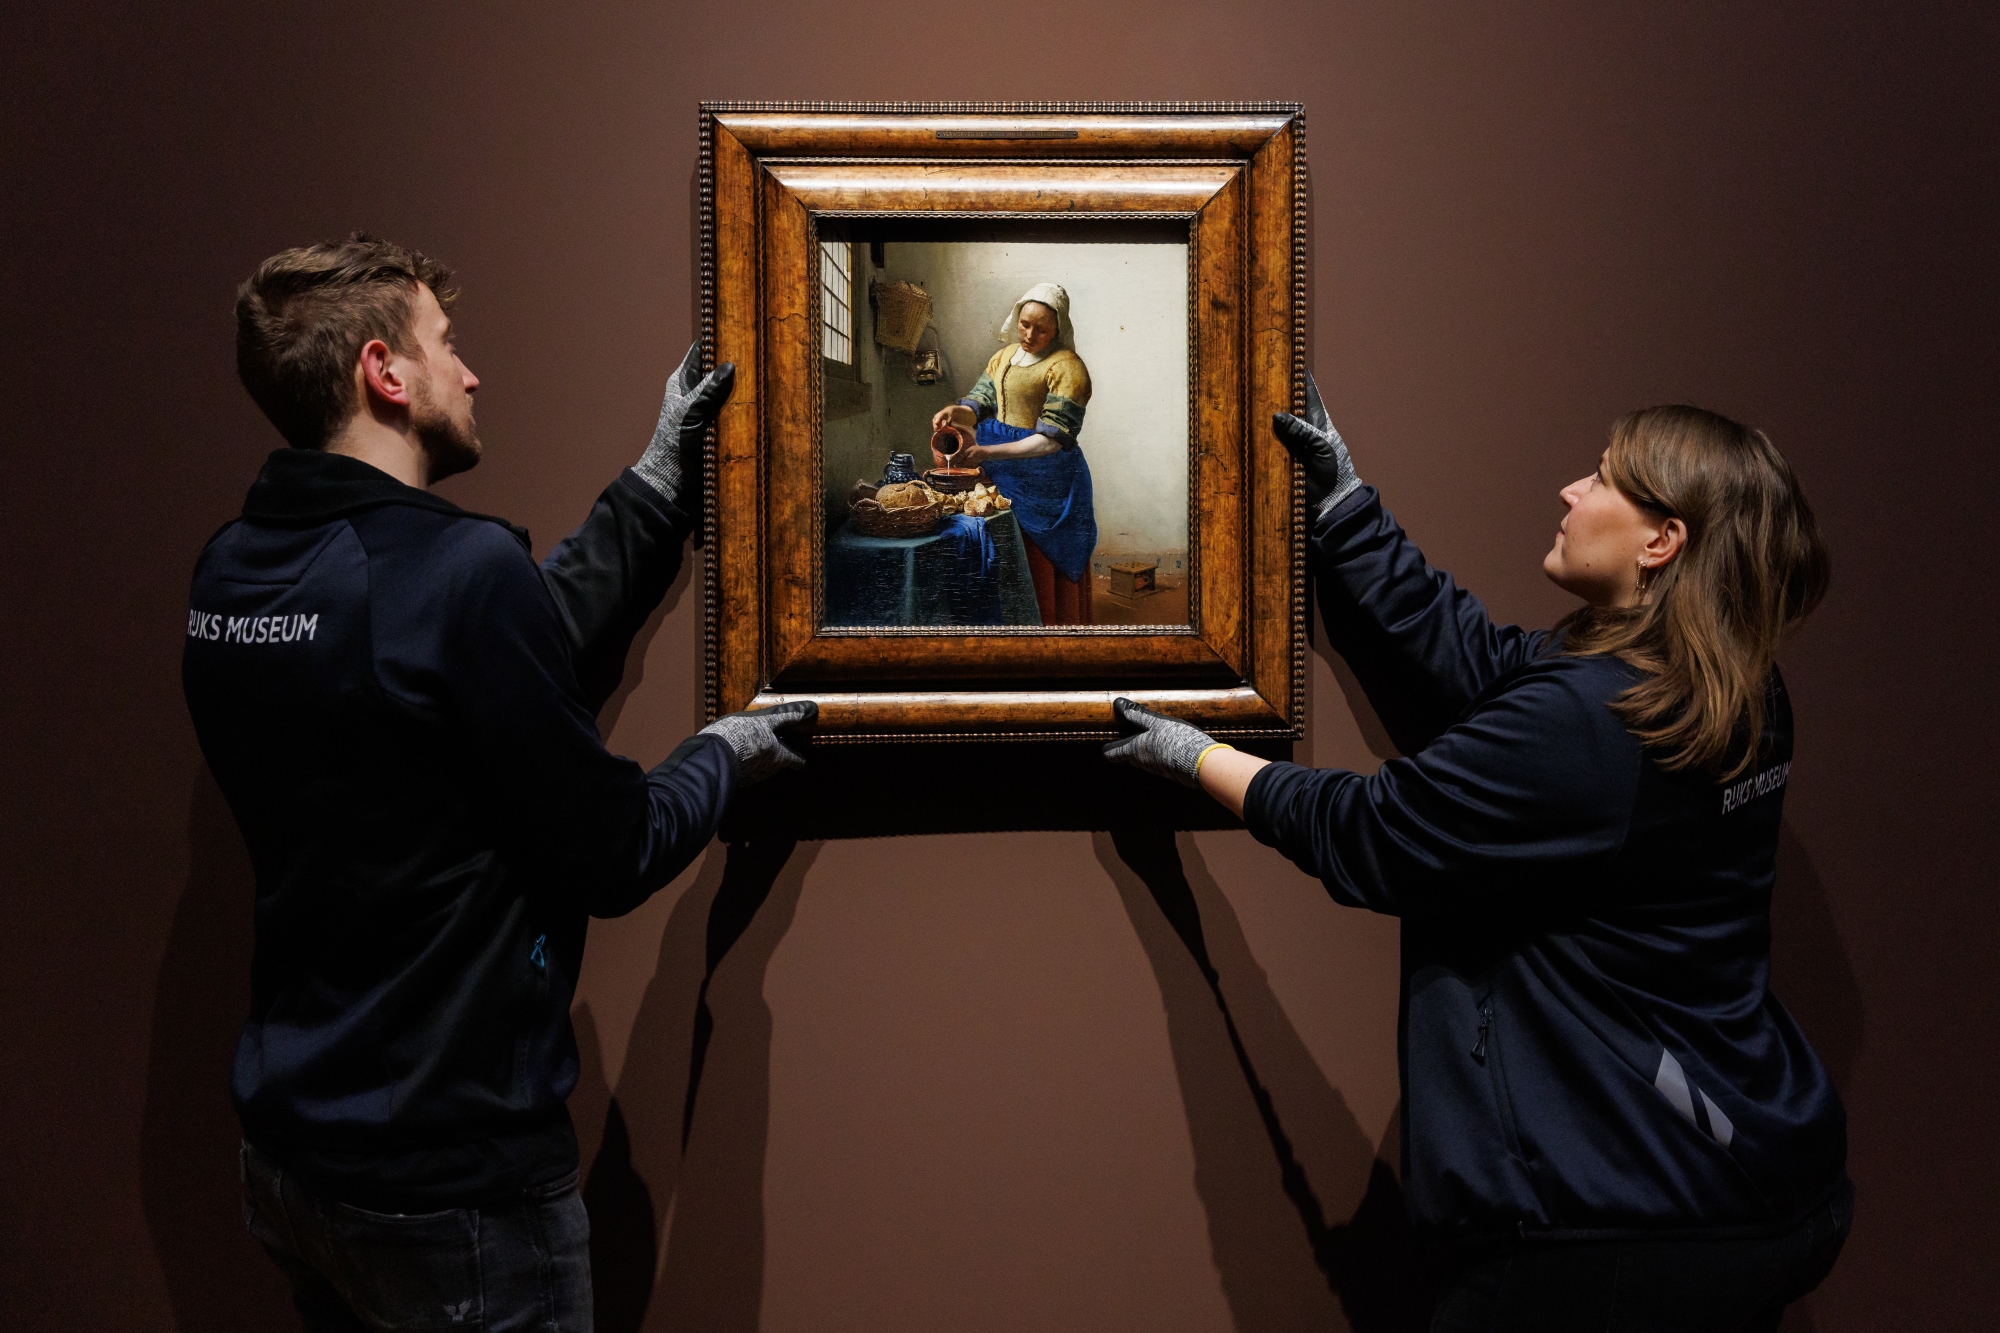 Two staff at the Rijksmuseum in Amsterdam install Johannes Vermeer's 'The Milkmaid'.